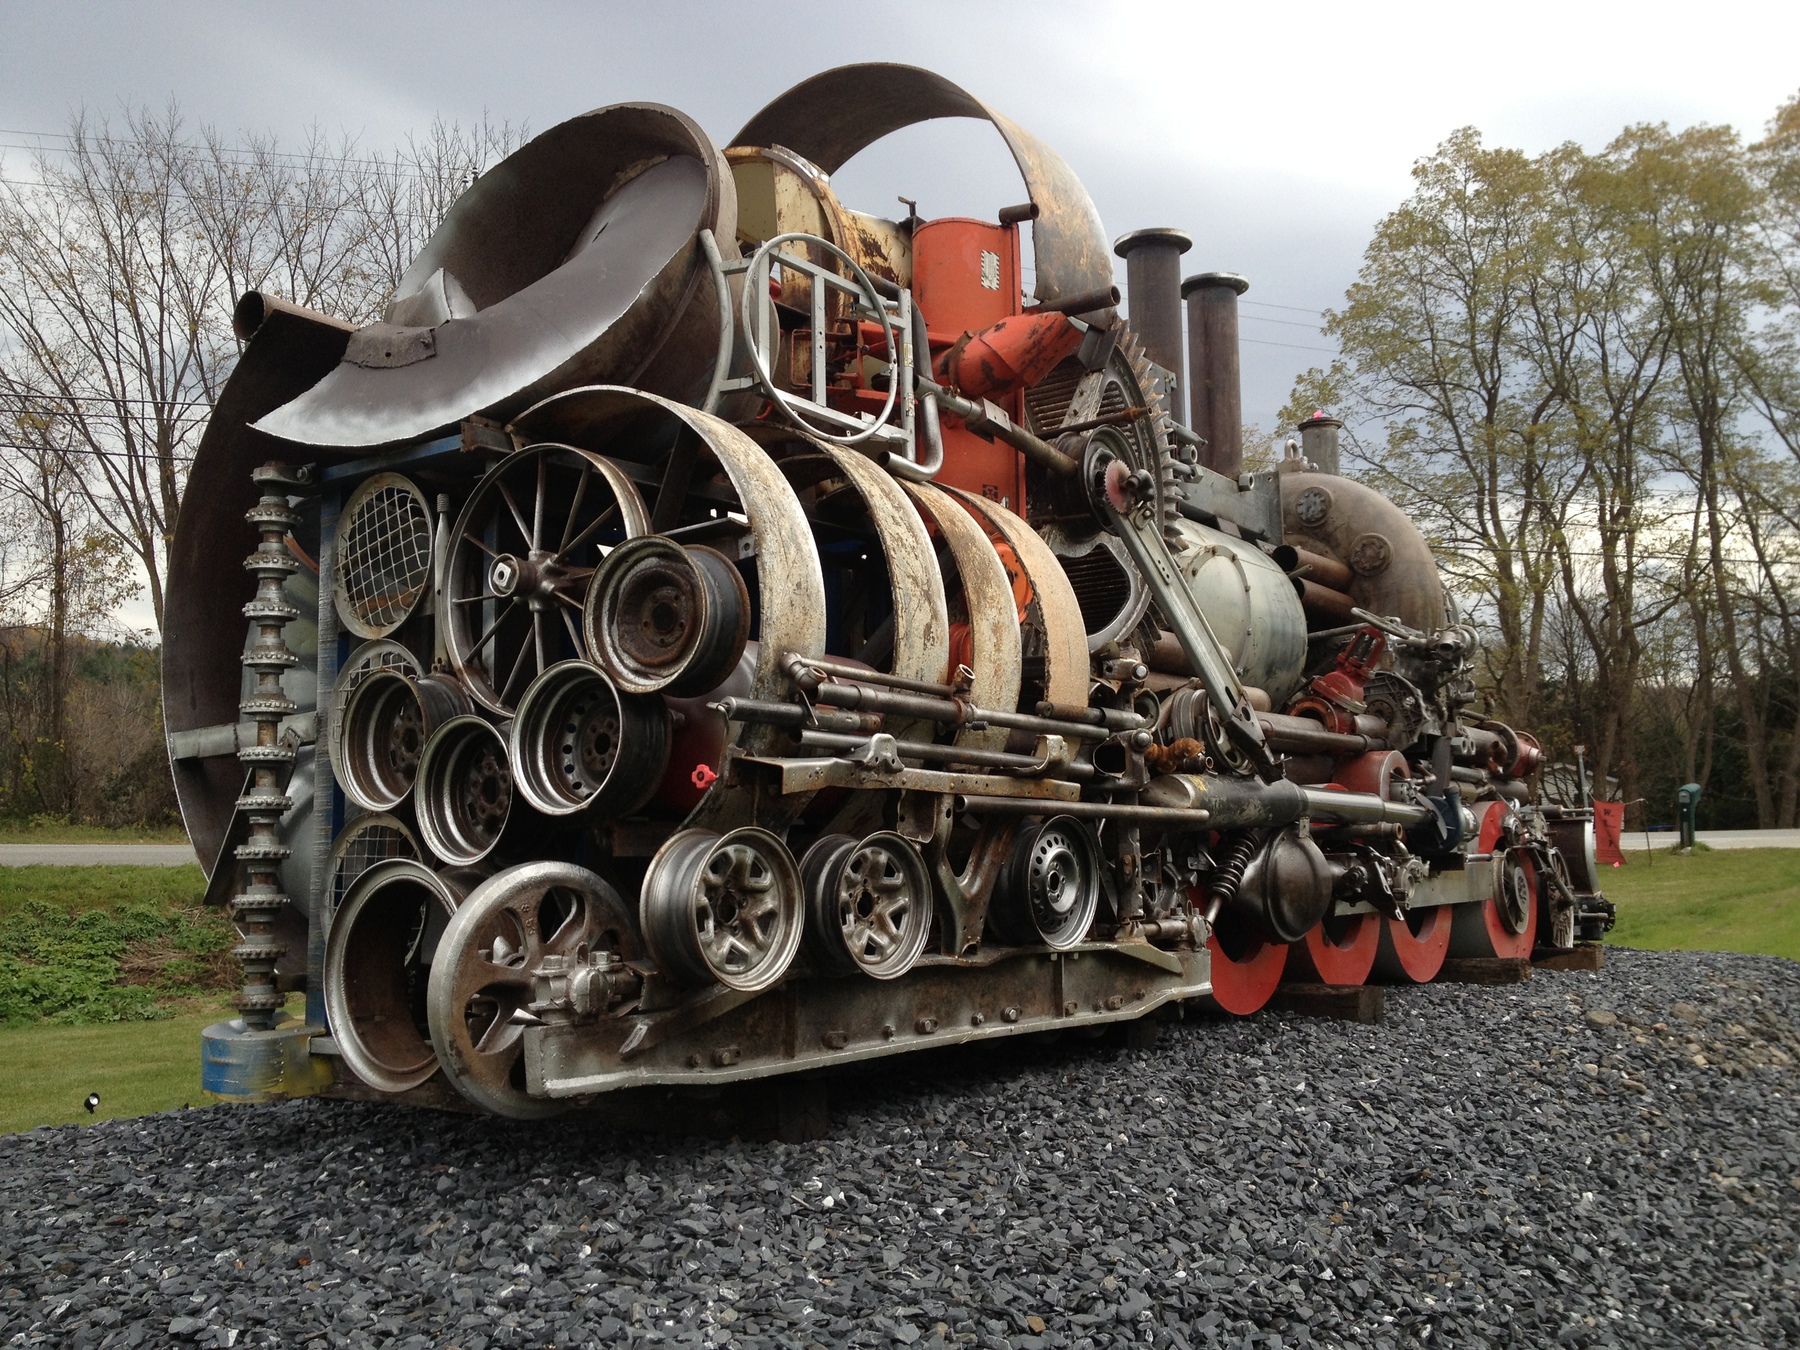 Back of train sculpture made out of random machine parts